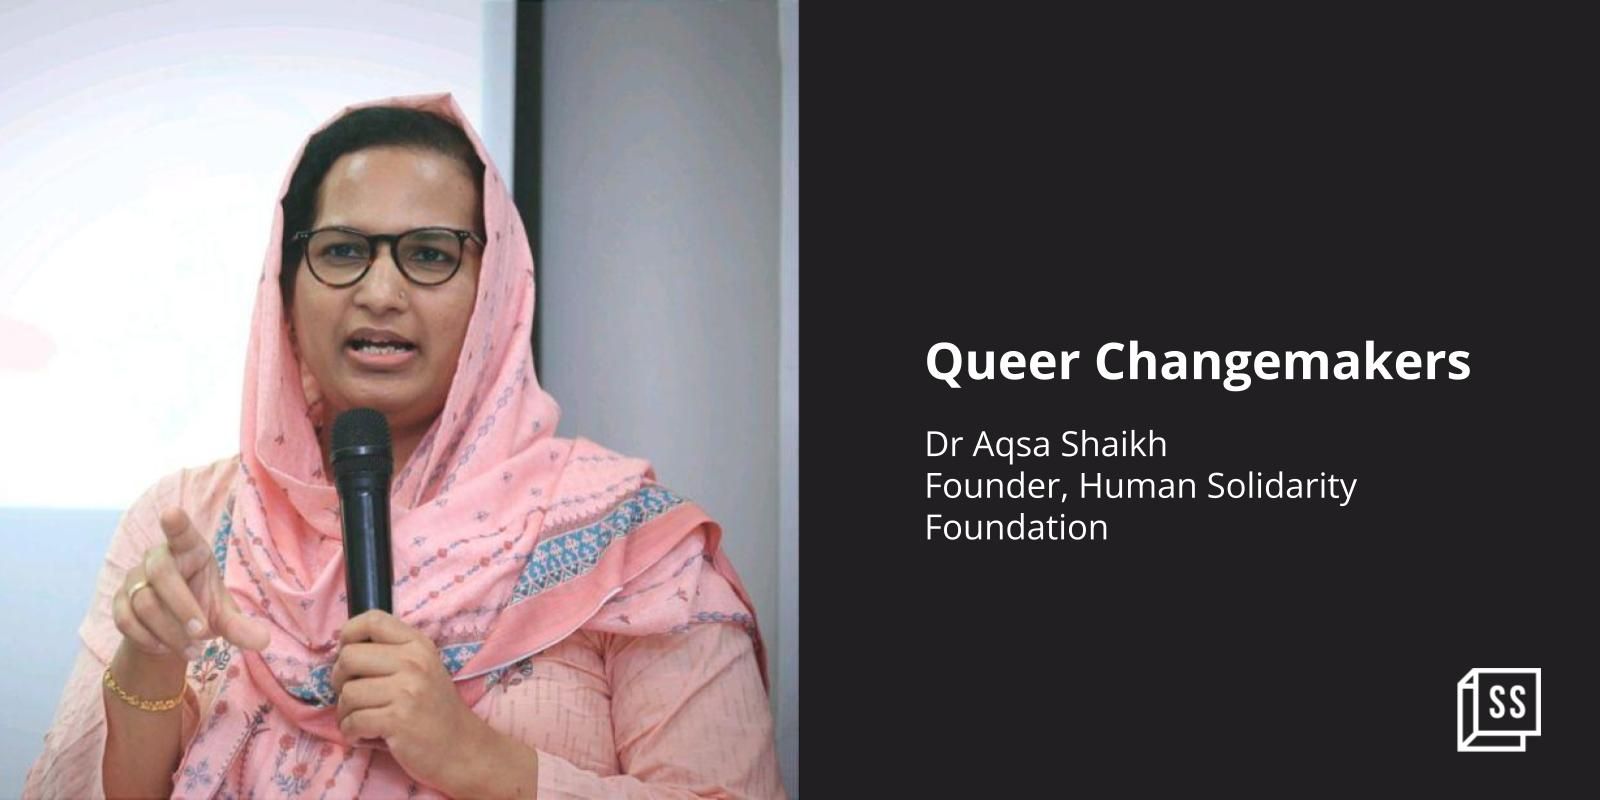 [Queer Changemakers] How a trans doctor is fighting to make healthcare in India inclusive 